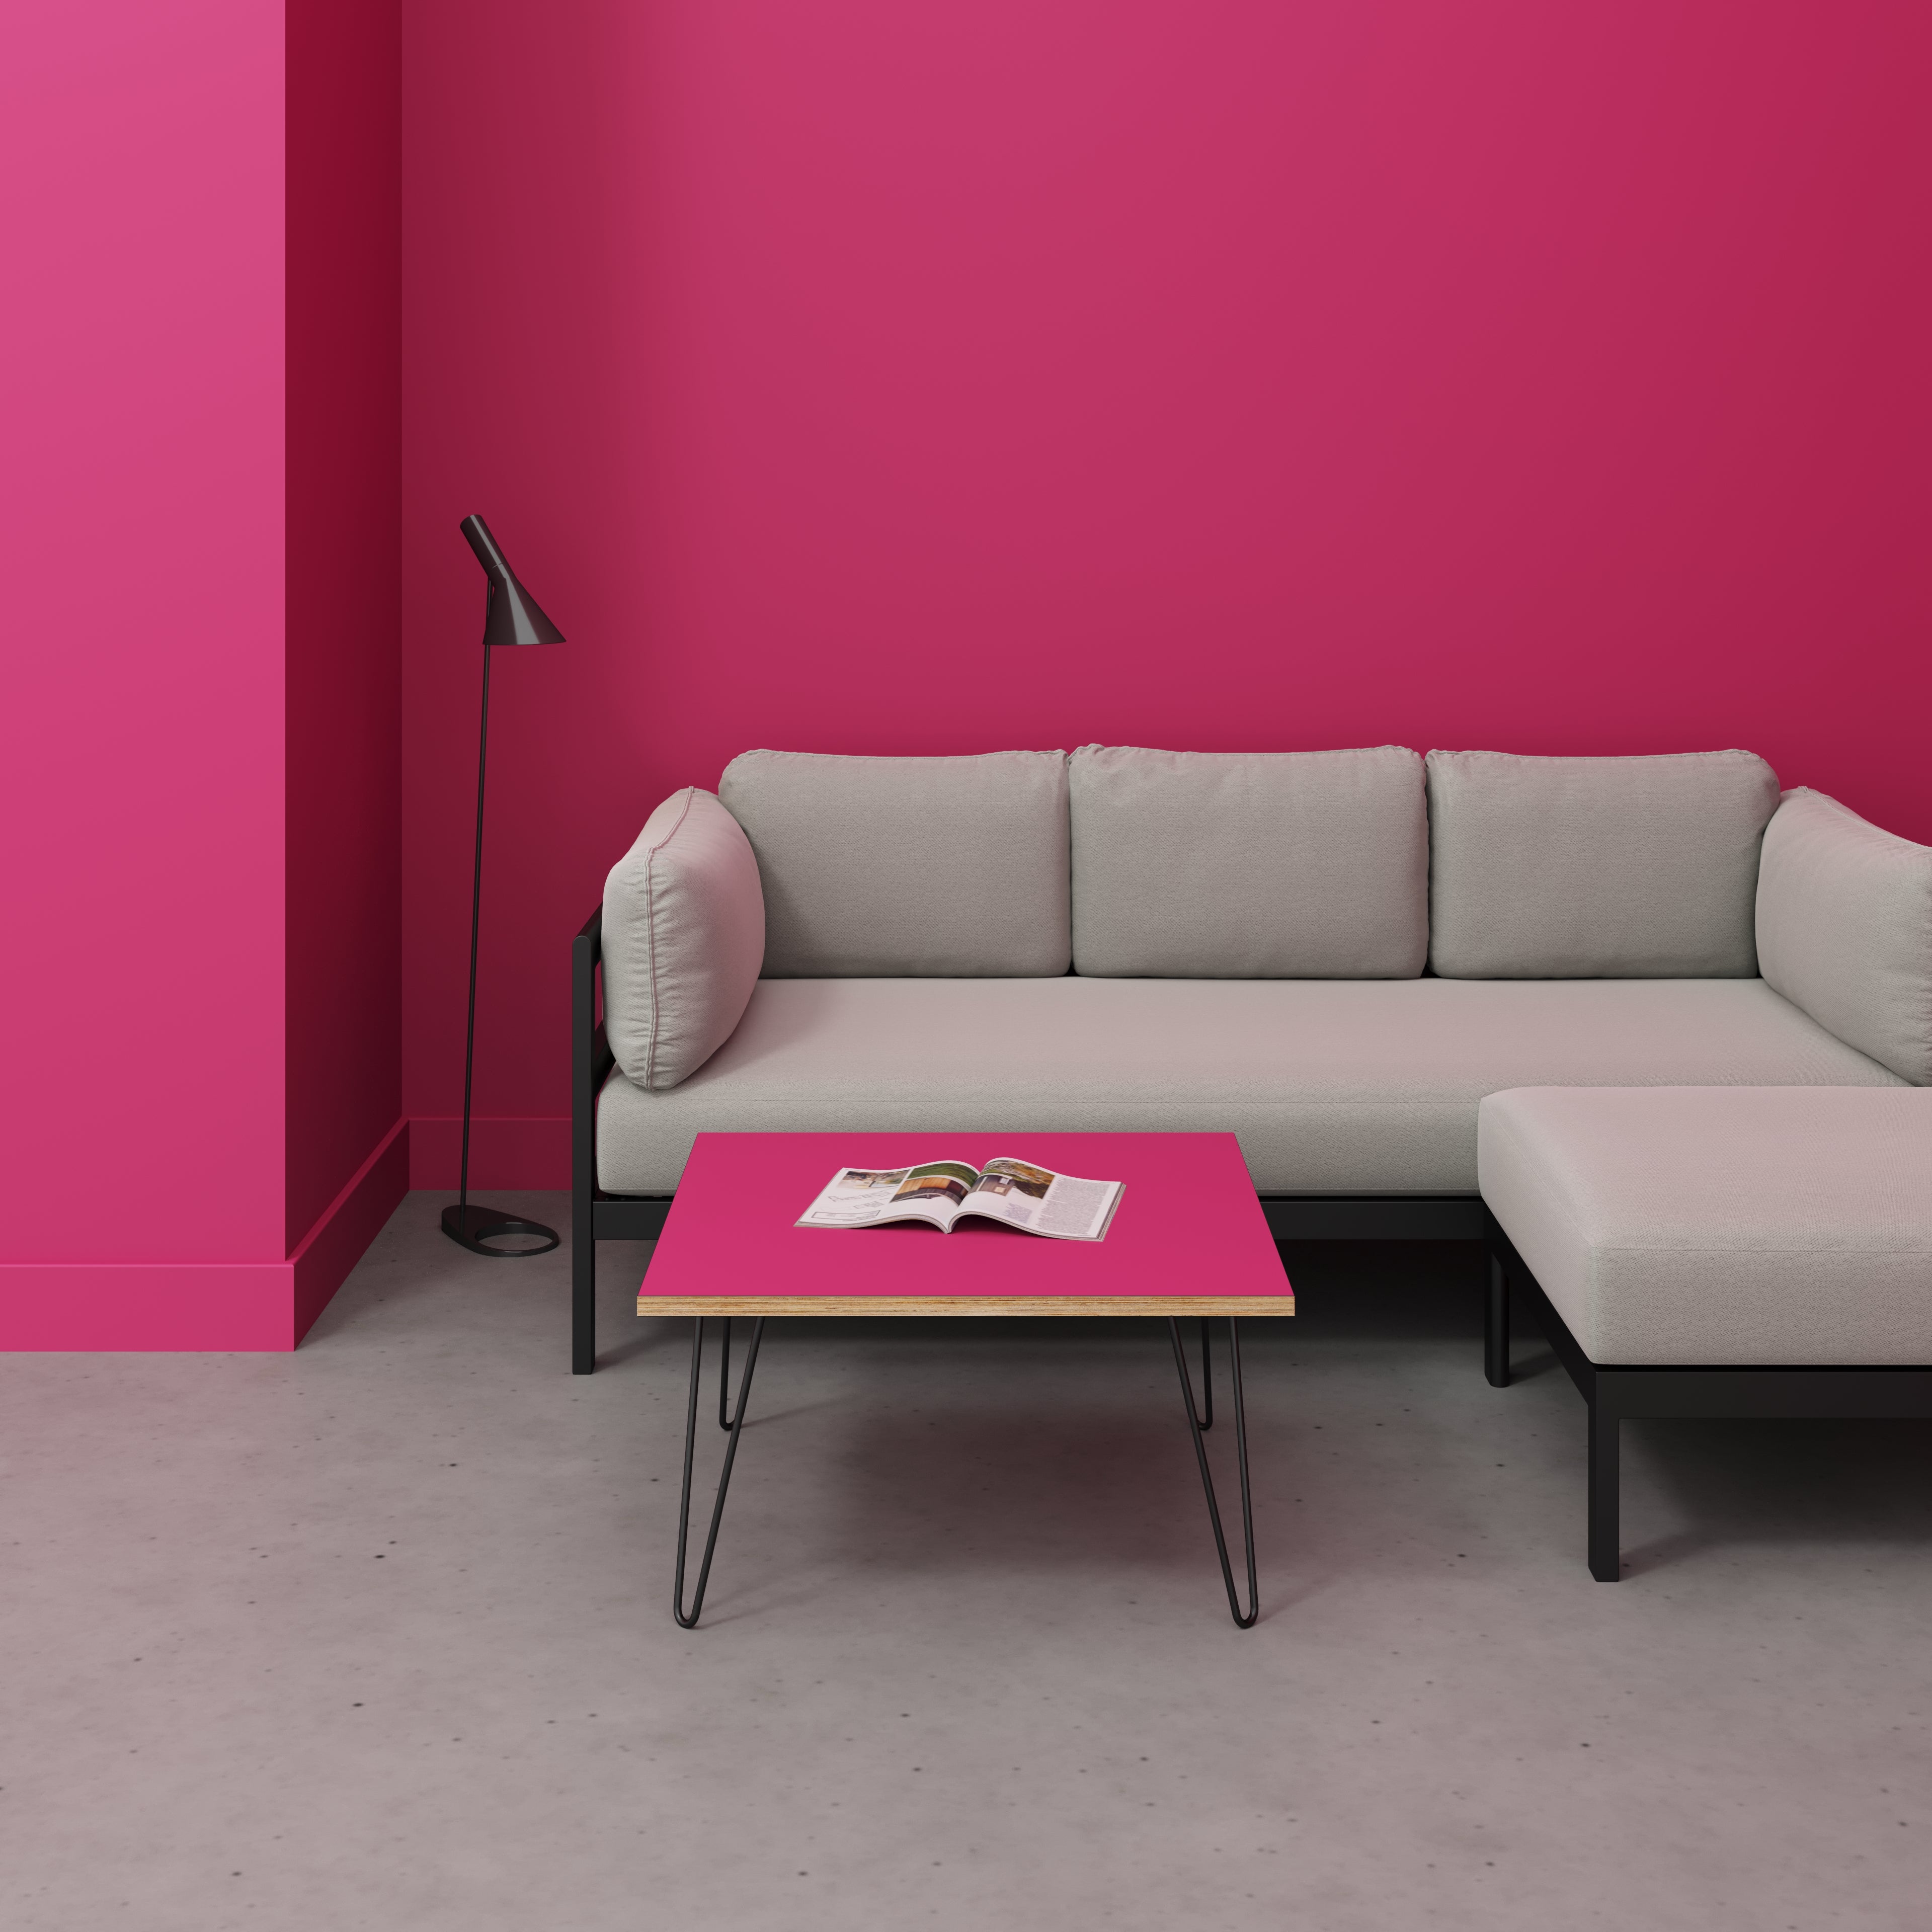 Coffee Table with Black Hairpin Legs - Formica Juicy Pink - 800(w) x 800(d) x 425(h)